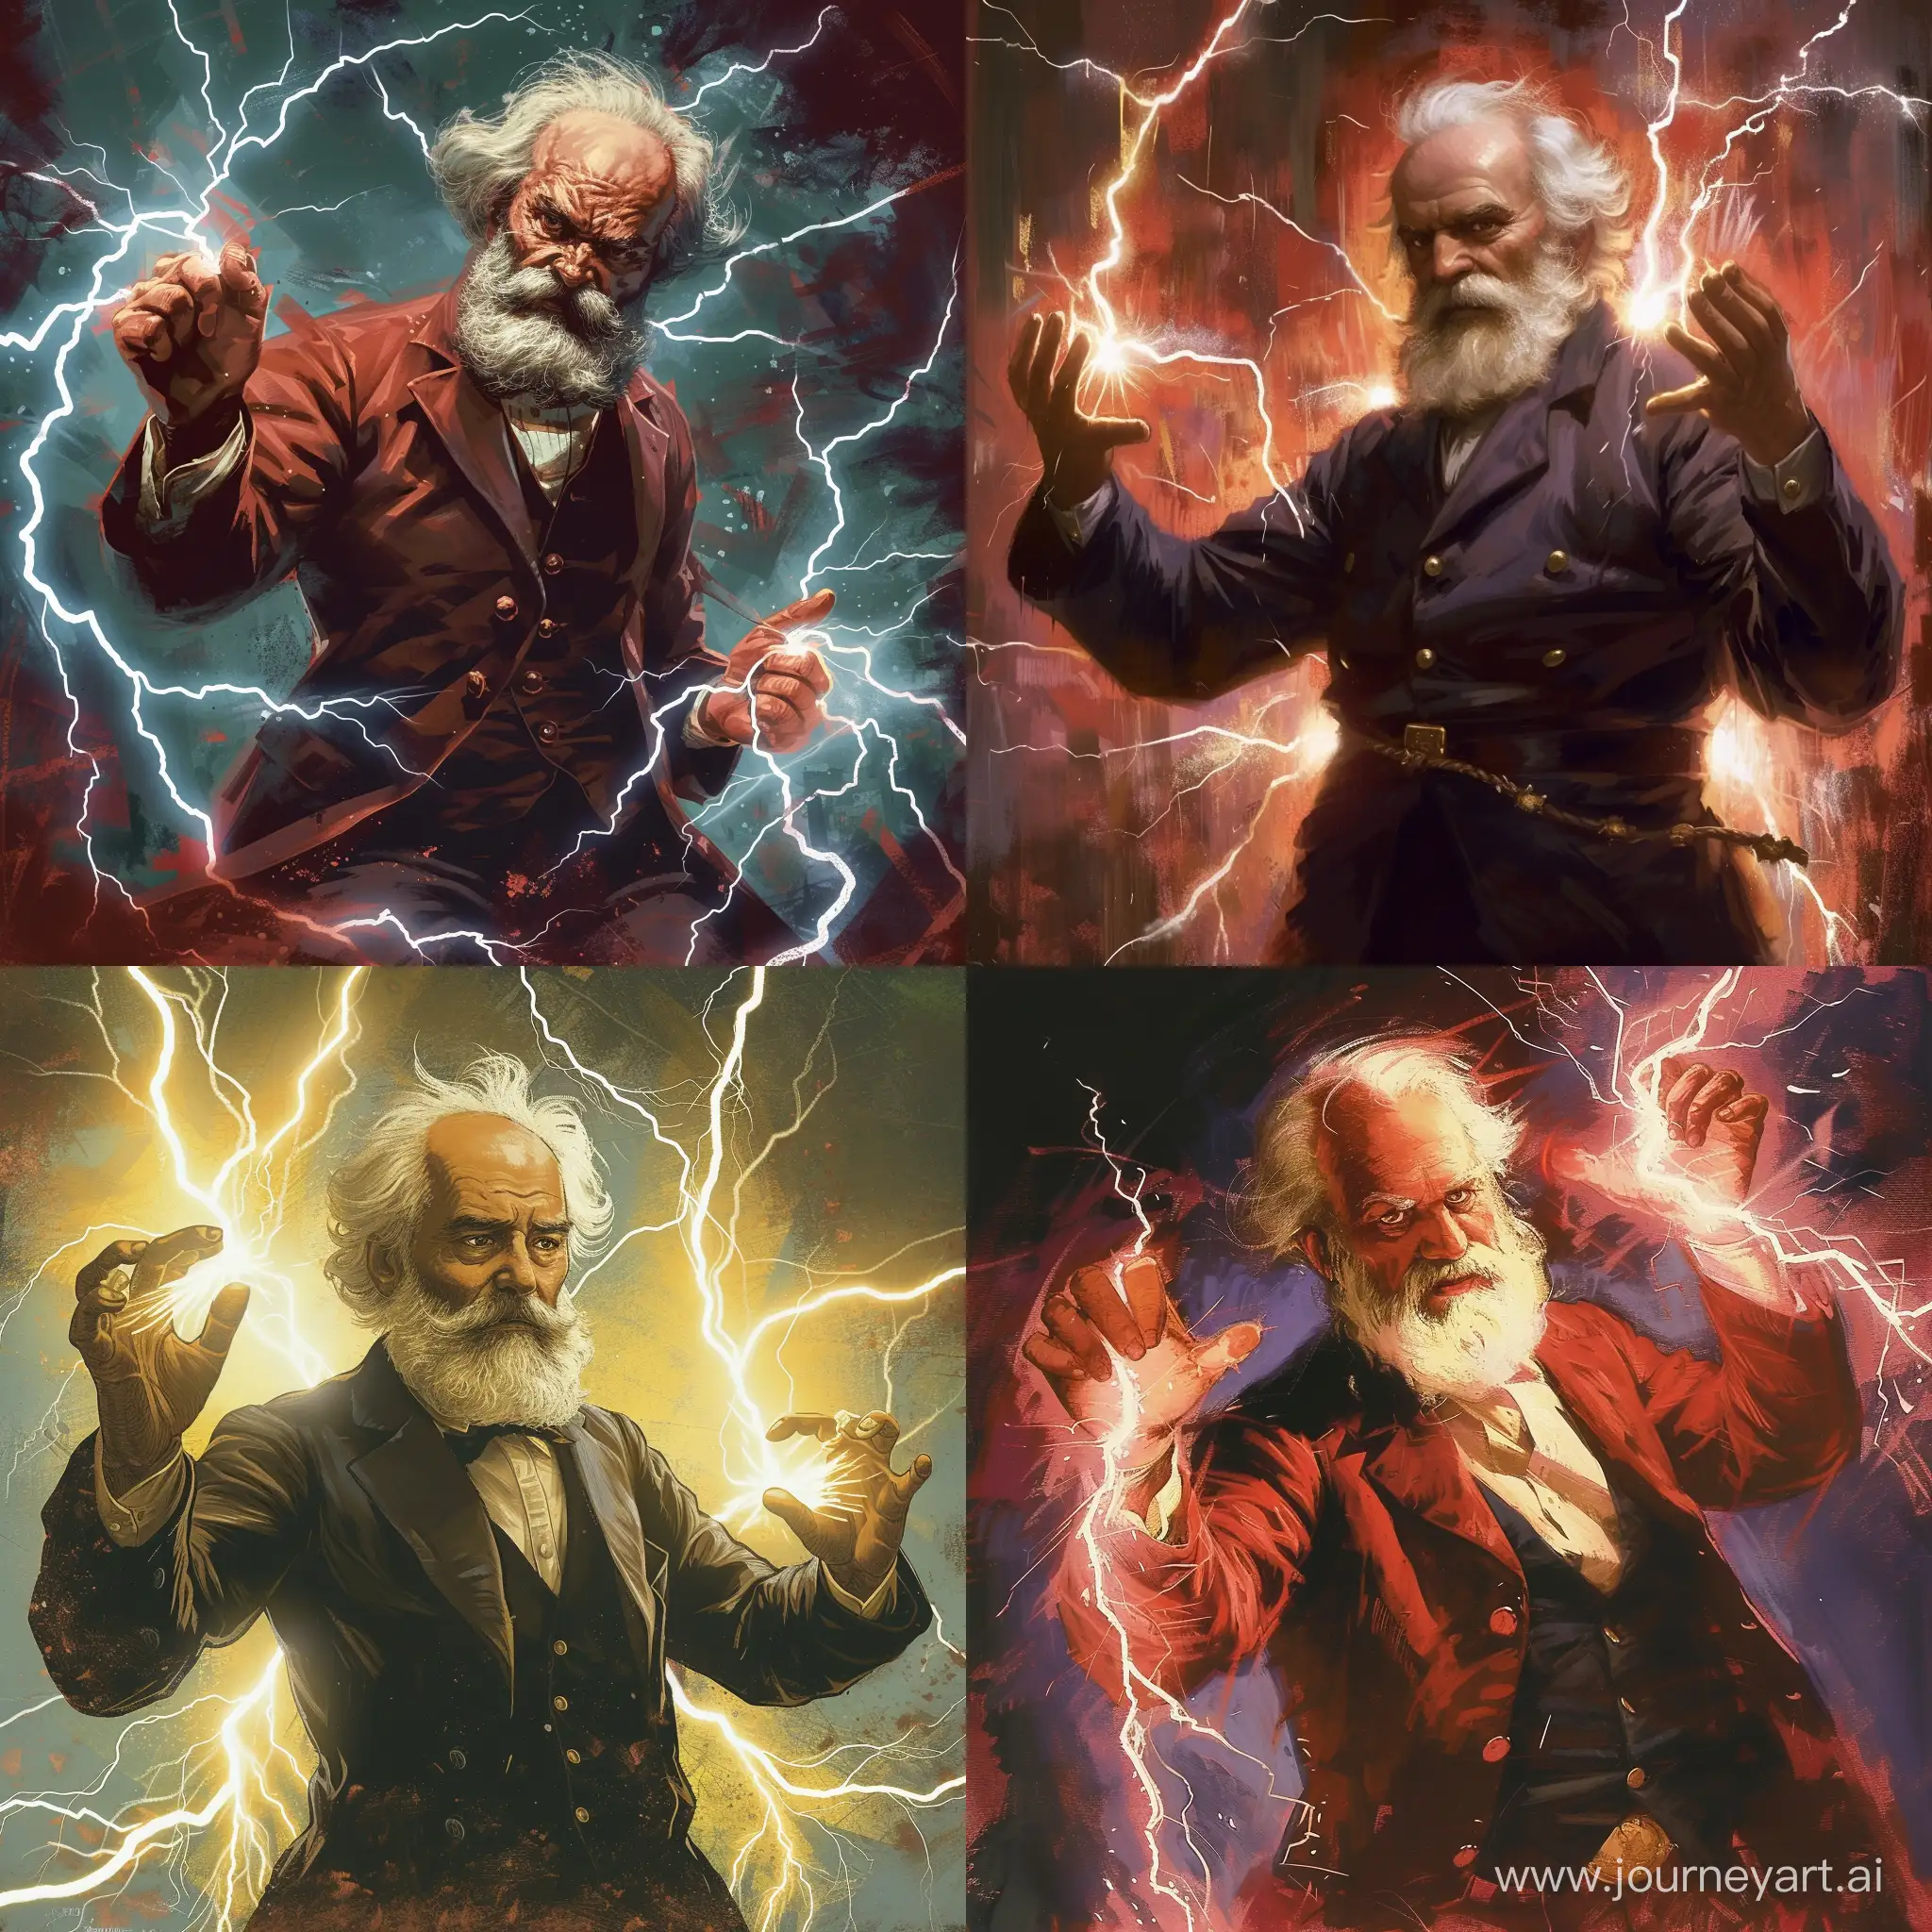 Karl Marx releases lightning bolts from his fingers